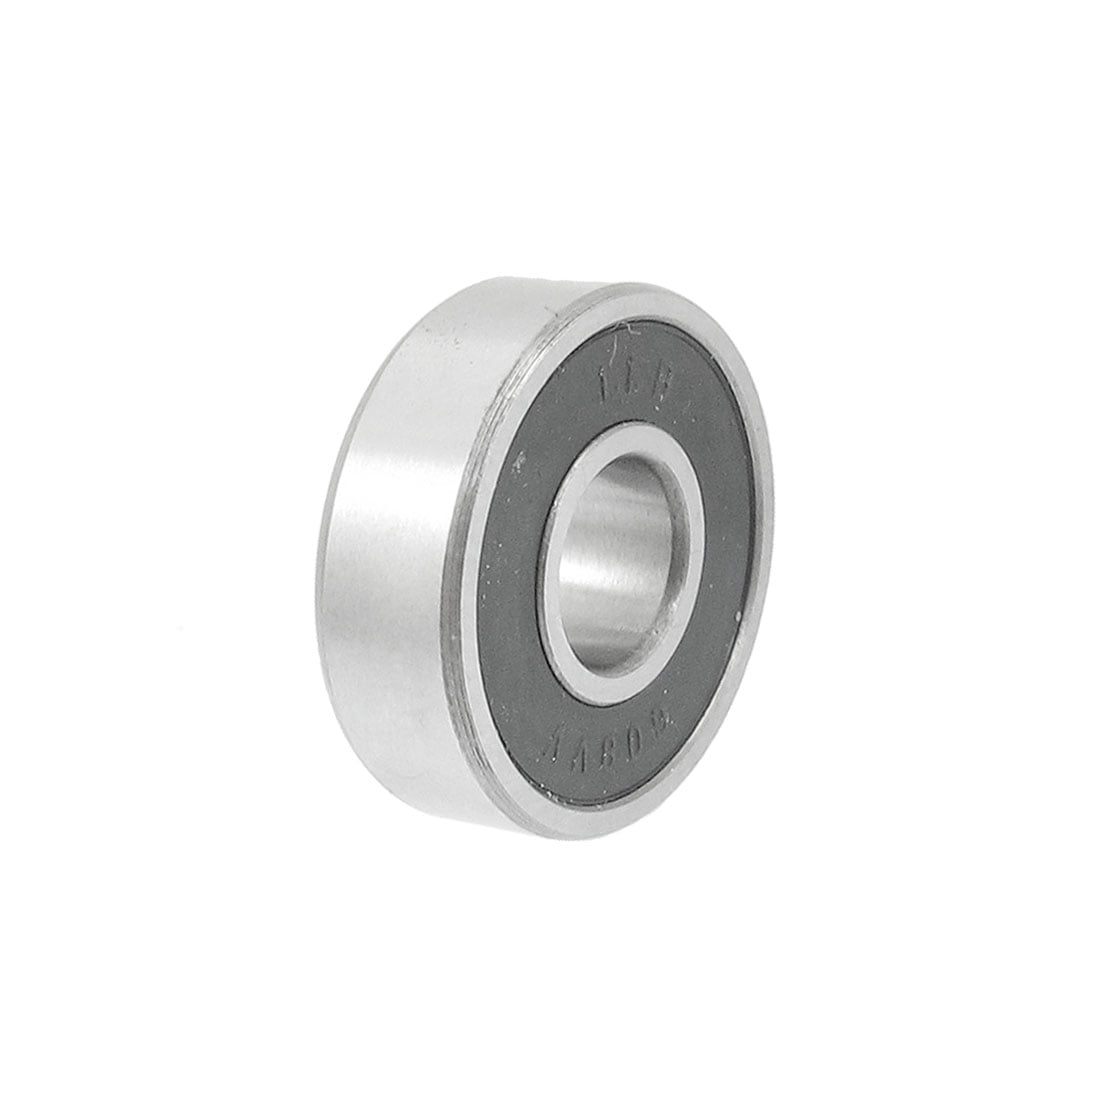 4 pack Extended Race Shielded Bearings 1/4" x 22mm x 7mm 